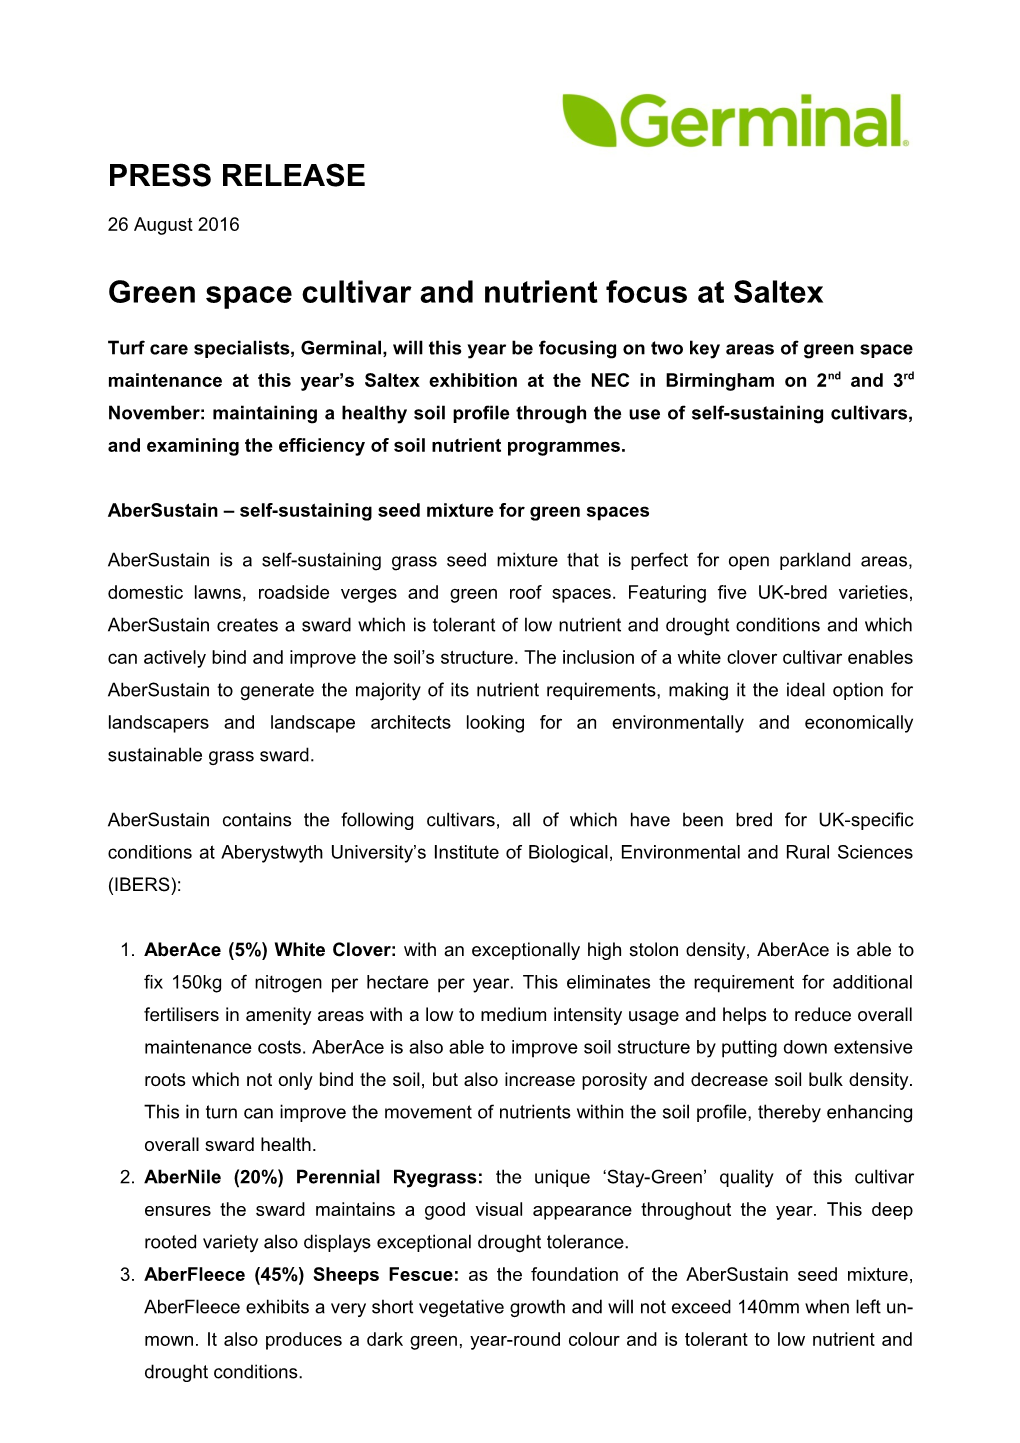 Green Space Cultivar and Nutrient Focus at Saltex